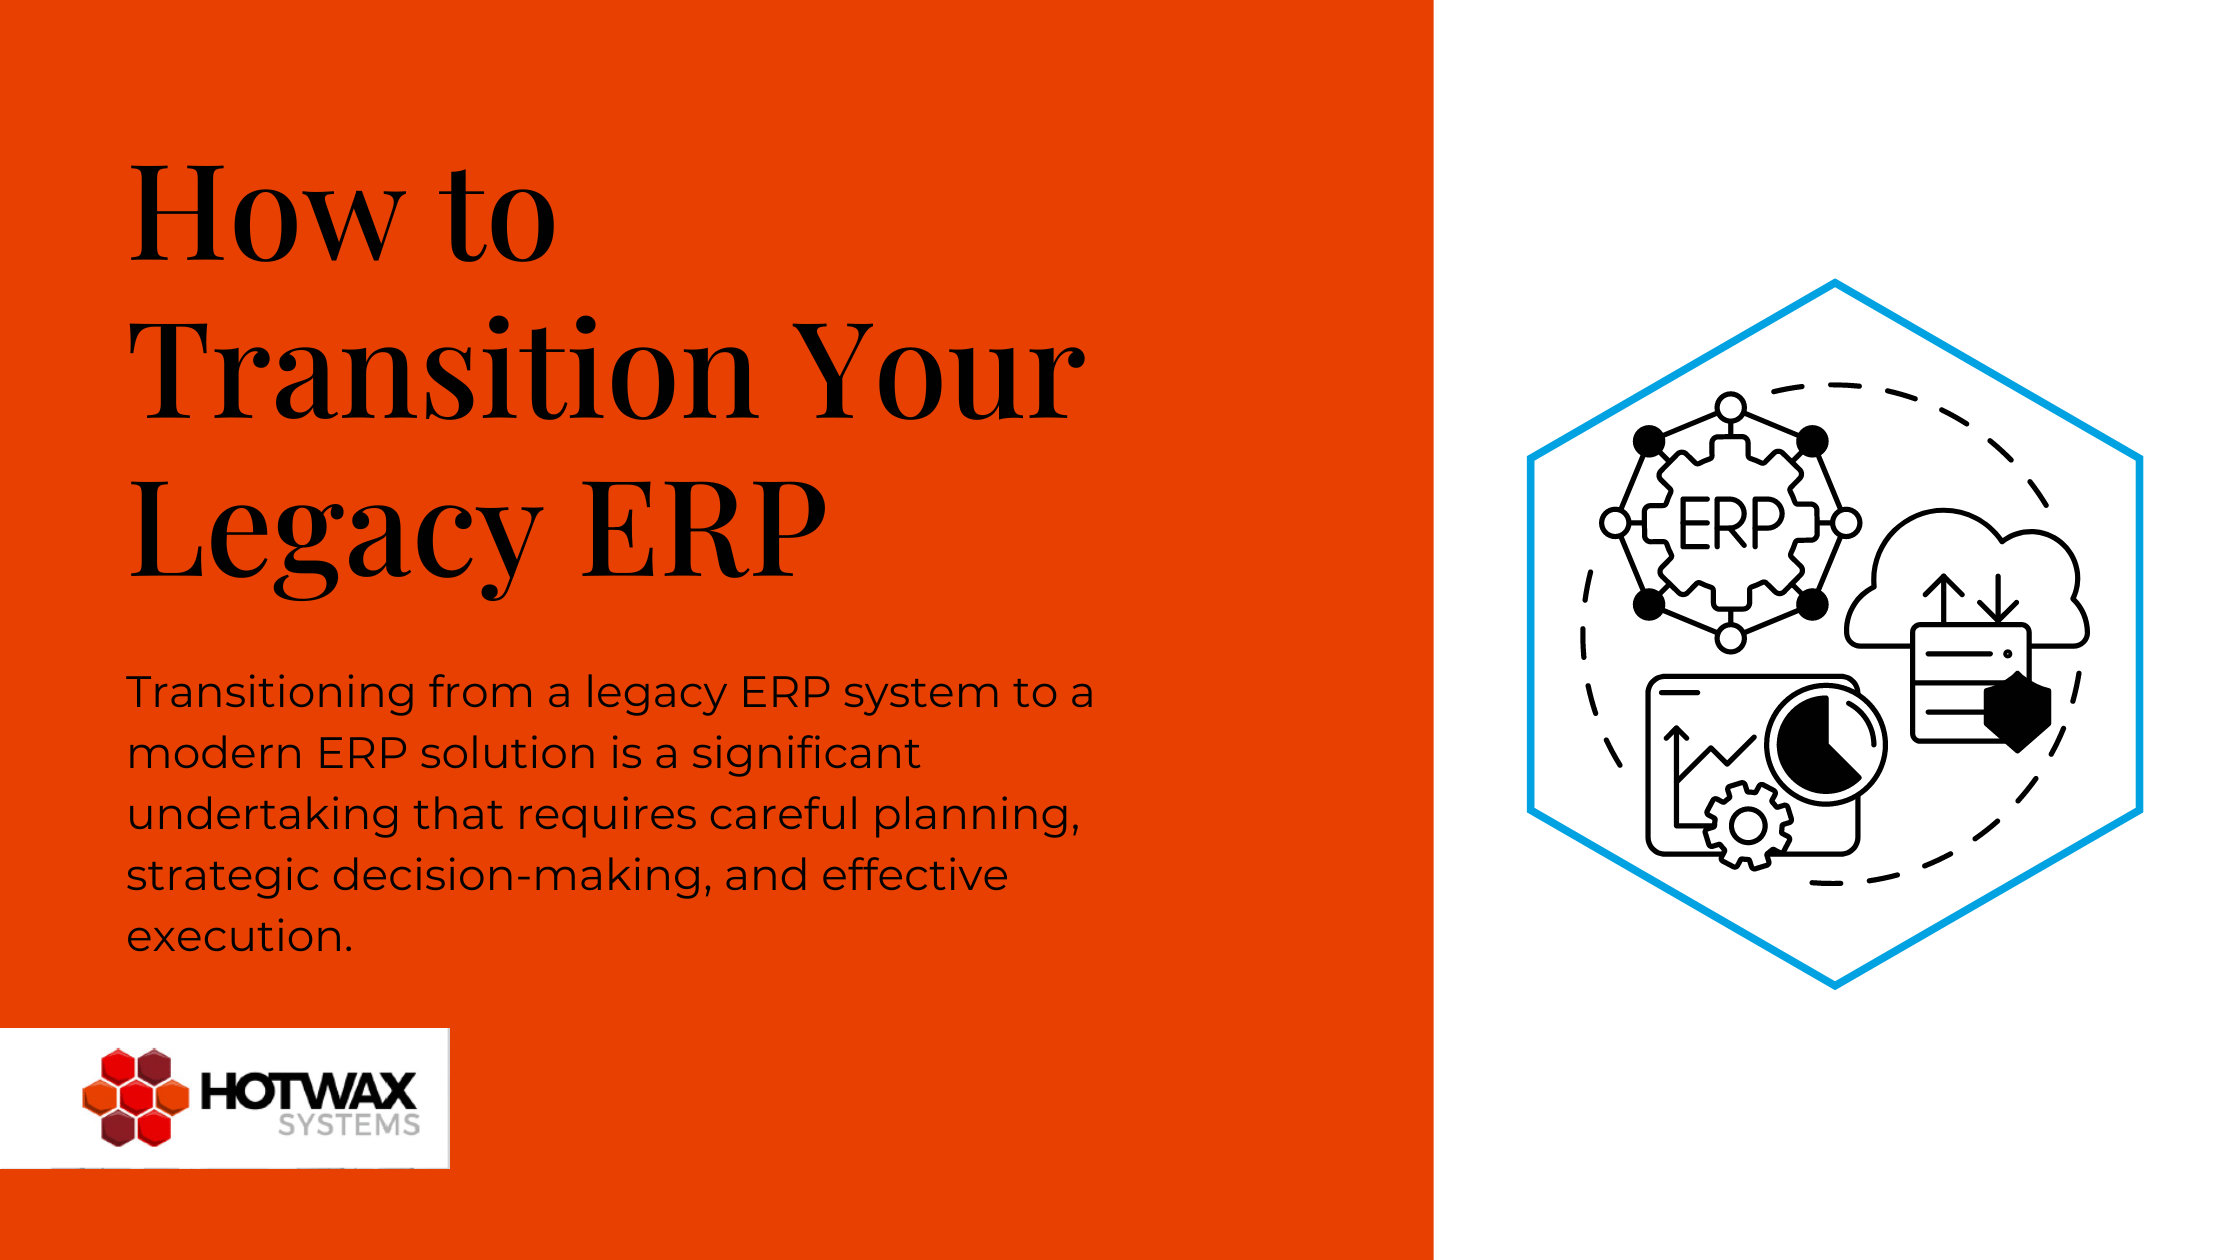 How to Transition Your Legacy ERP